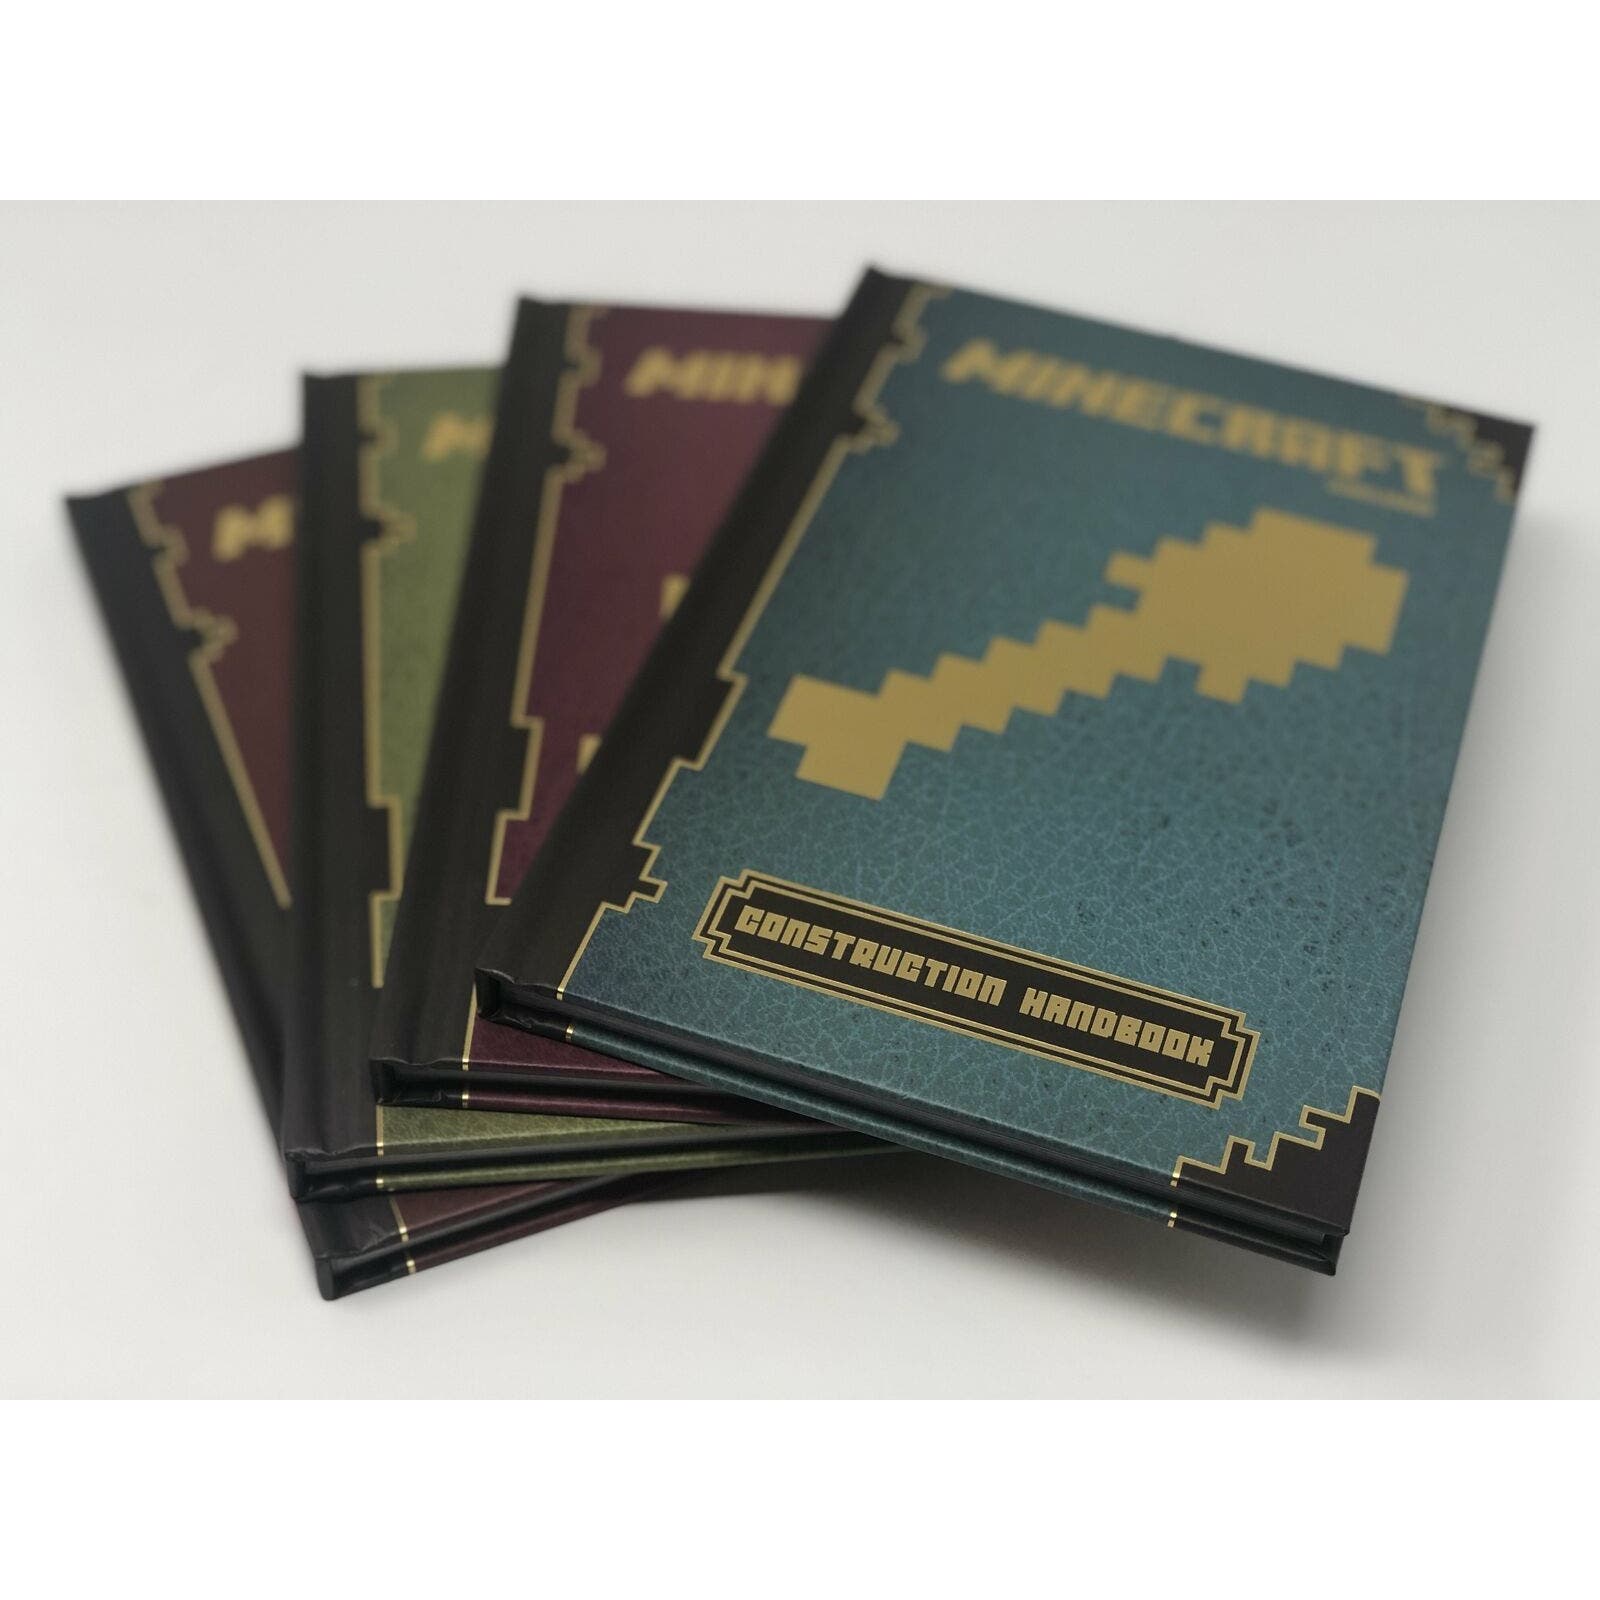 (First Edition) MINECRAFT: THE COMPLETE HANDBOOK COLLECTION by Mojang - Uncle Buddy's Beard & Used Books